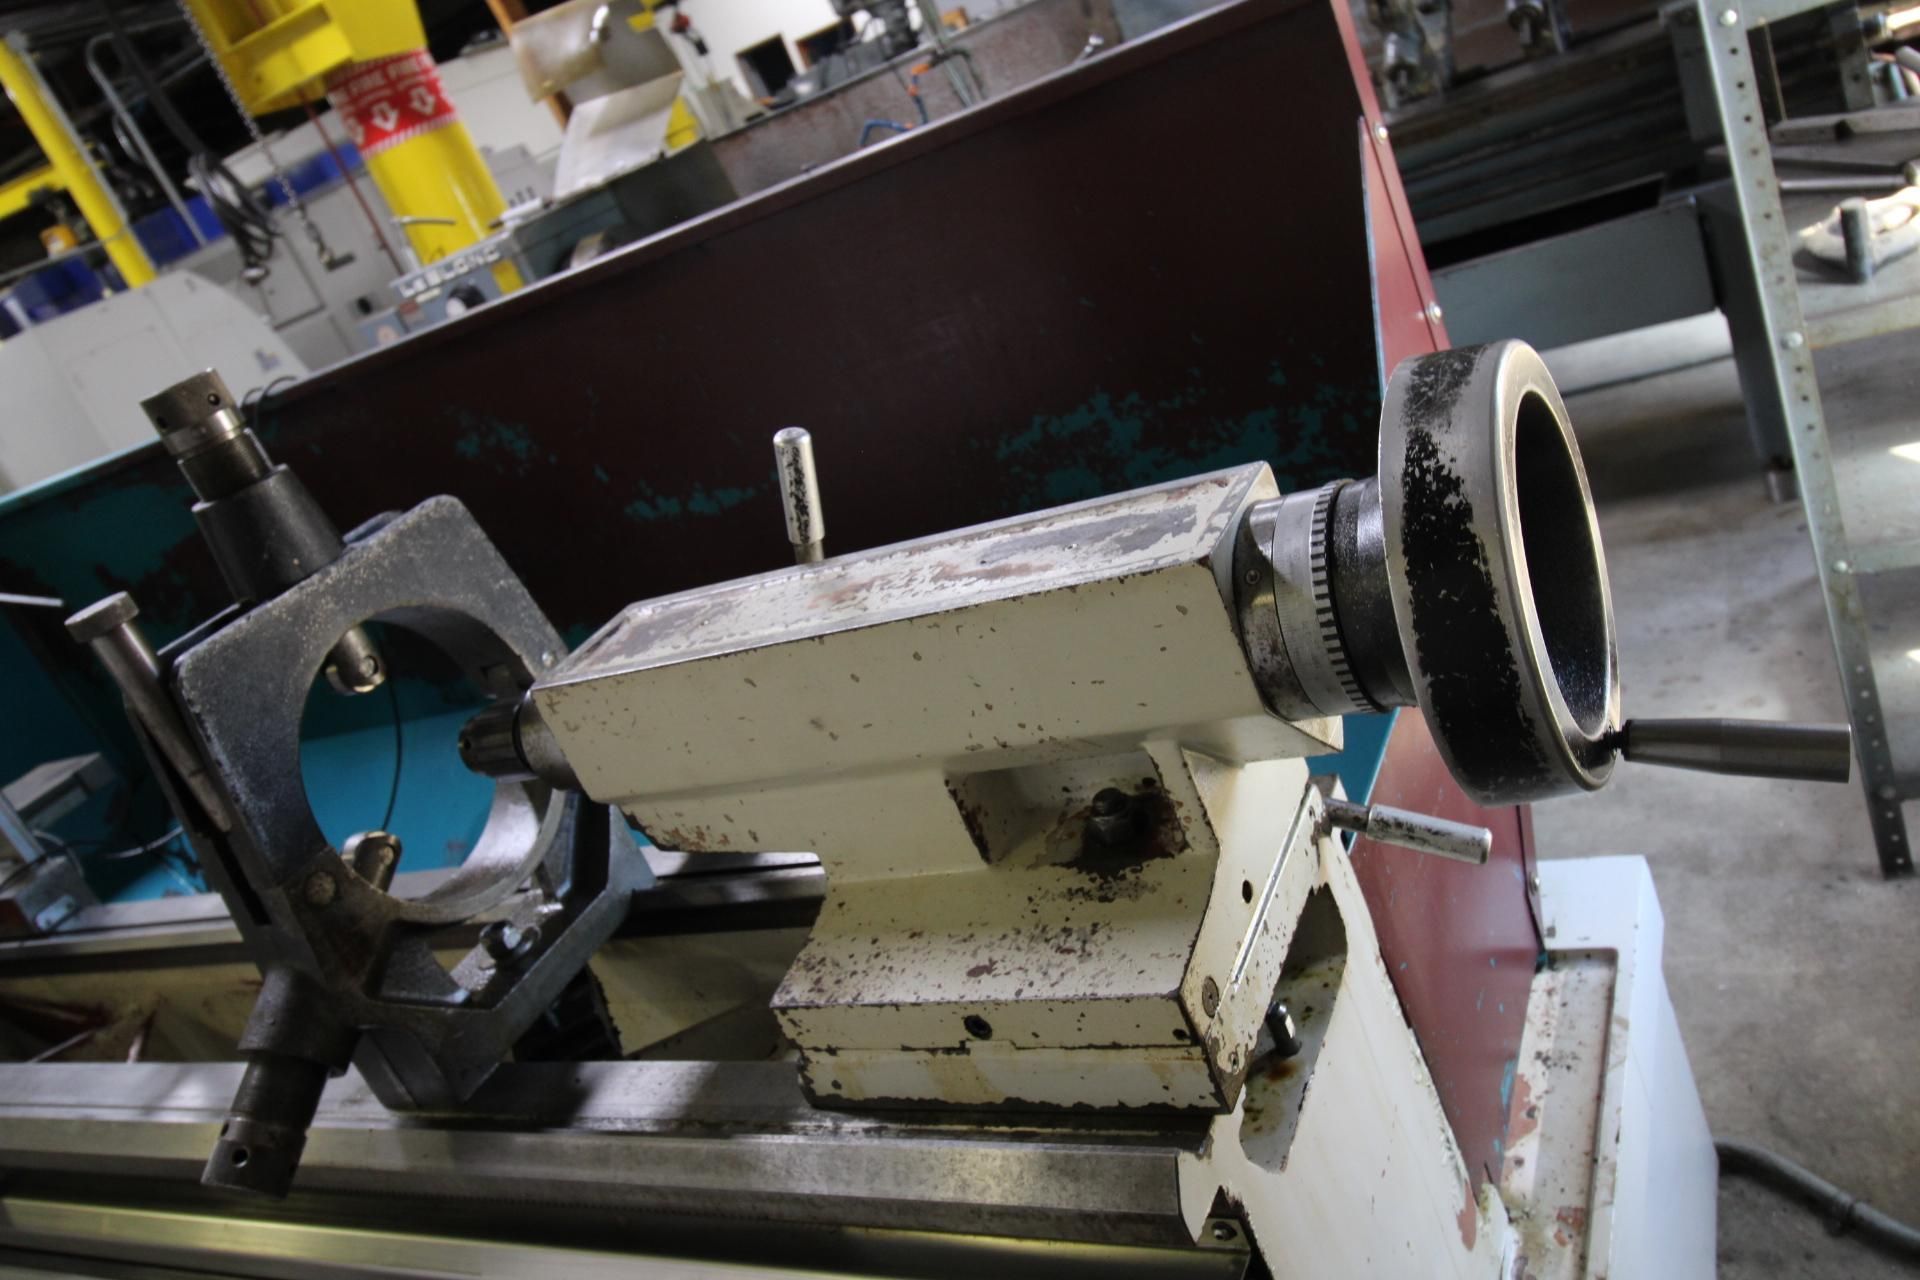 ENGINE LATHE, 18” X 80” HARRISON MDL. V460, new 2010, 12” 3-jaw chuck, gap bed, Newall DP700 2- - Image 10 of 11